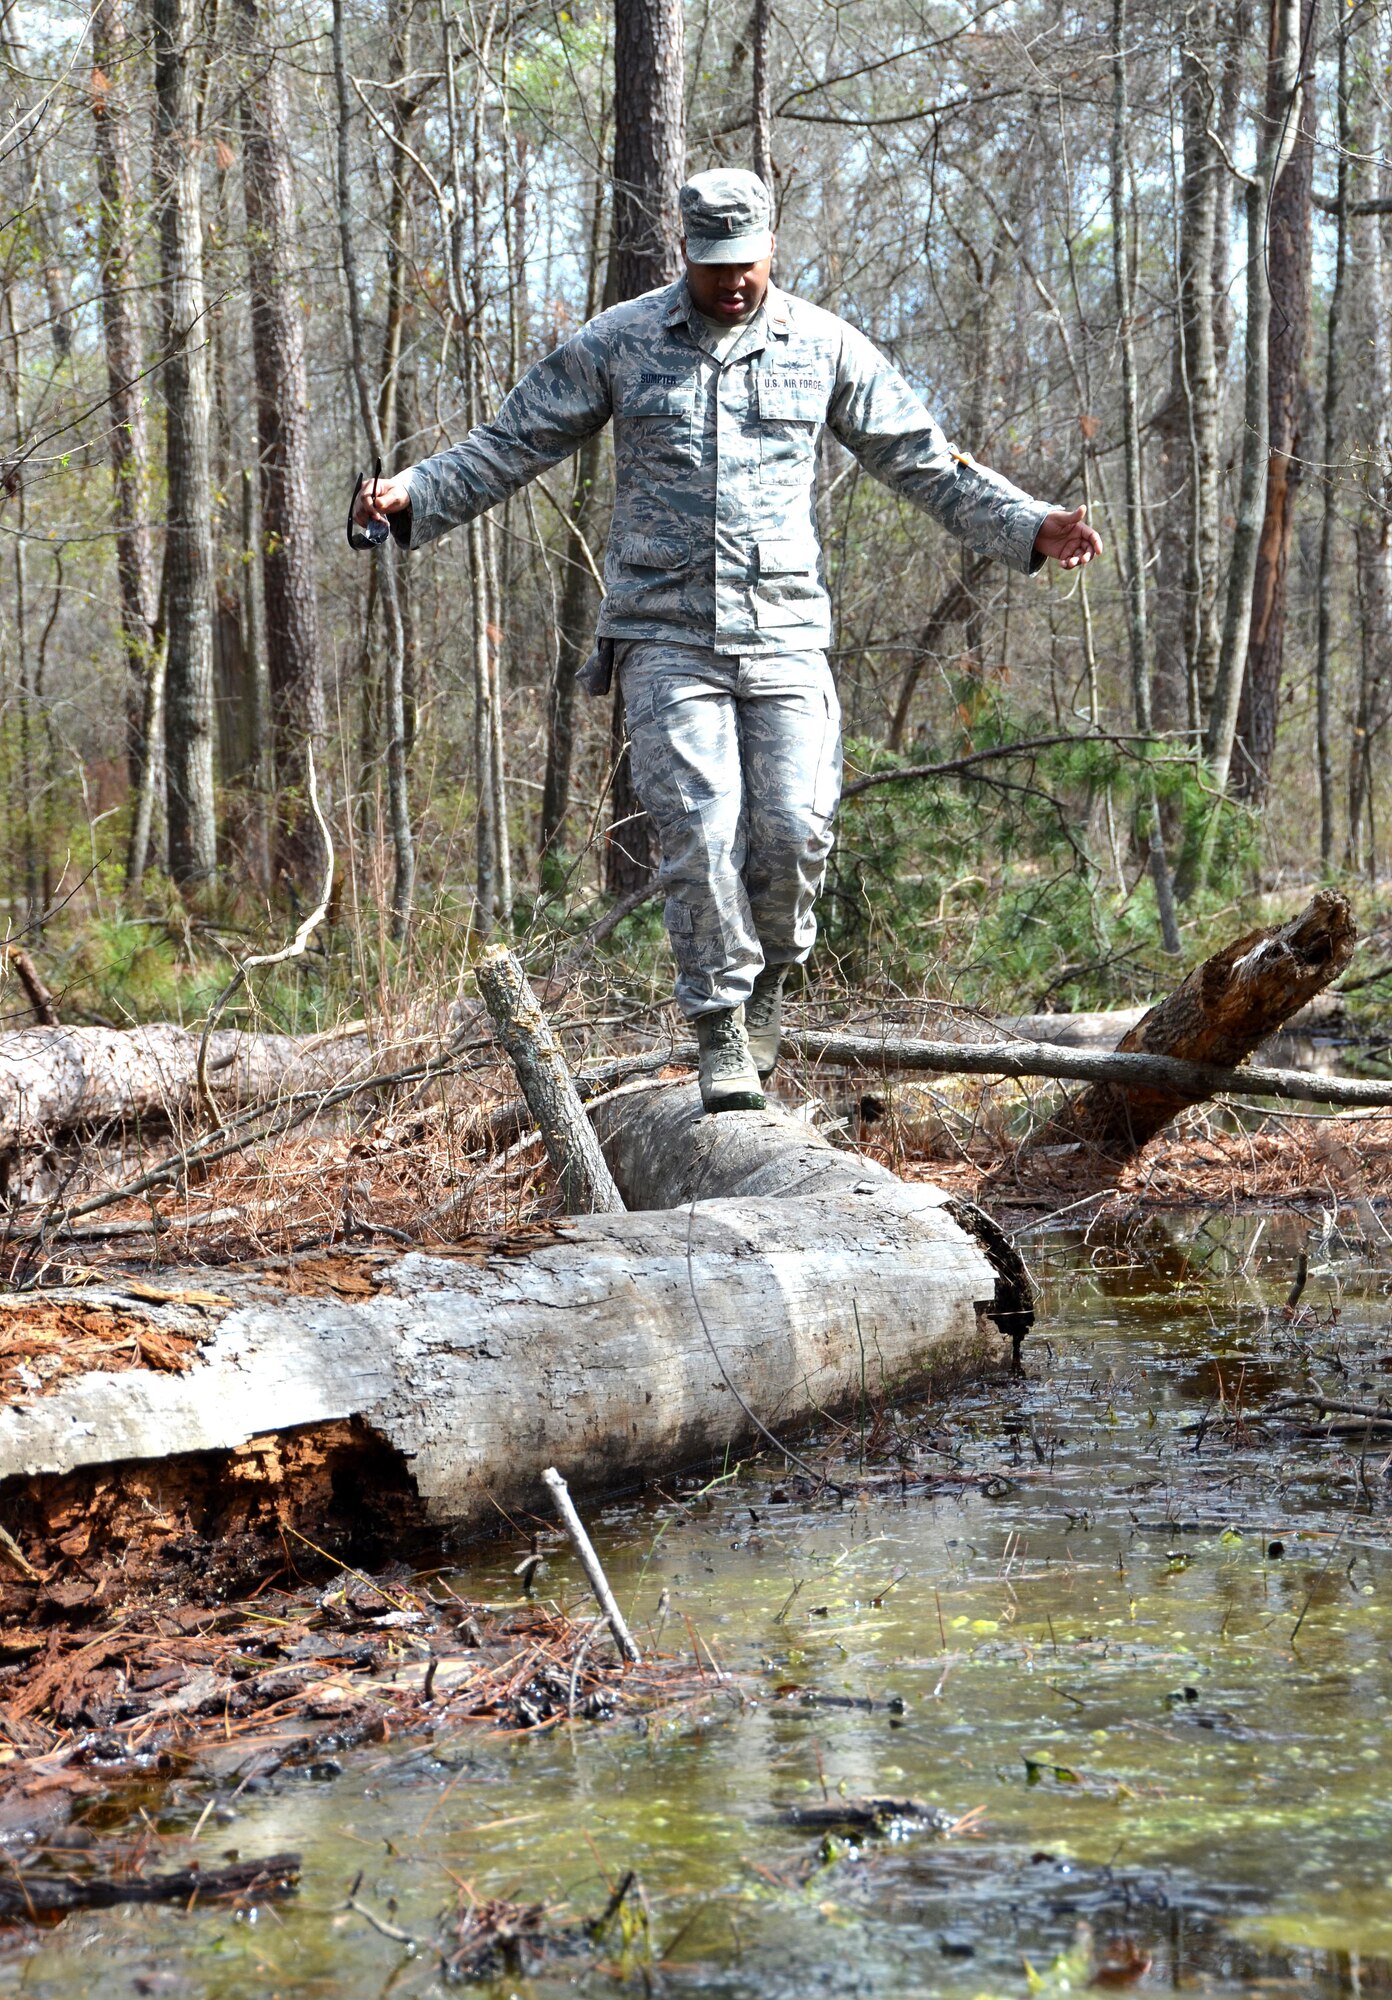 Second Lieutenant Steven Sumpter, 729th Air Control Squadron, balances himself ontop a fallen tree while navigating across a flooded area to get to the designated marker during a land navigation exercise on Robins Air Force Base, Ga., March 2, 2017. The 5th CCG provides a two-week course for a maximum of 34 students and cover a variety of topics such as land navigation, improvised explosive device detection, and much more. (U.S. Air Force photo by Tech. Sgt. Kelly Goonan/released)